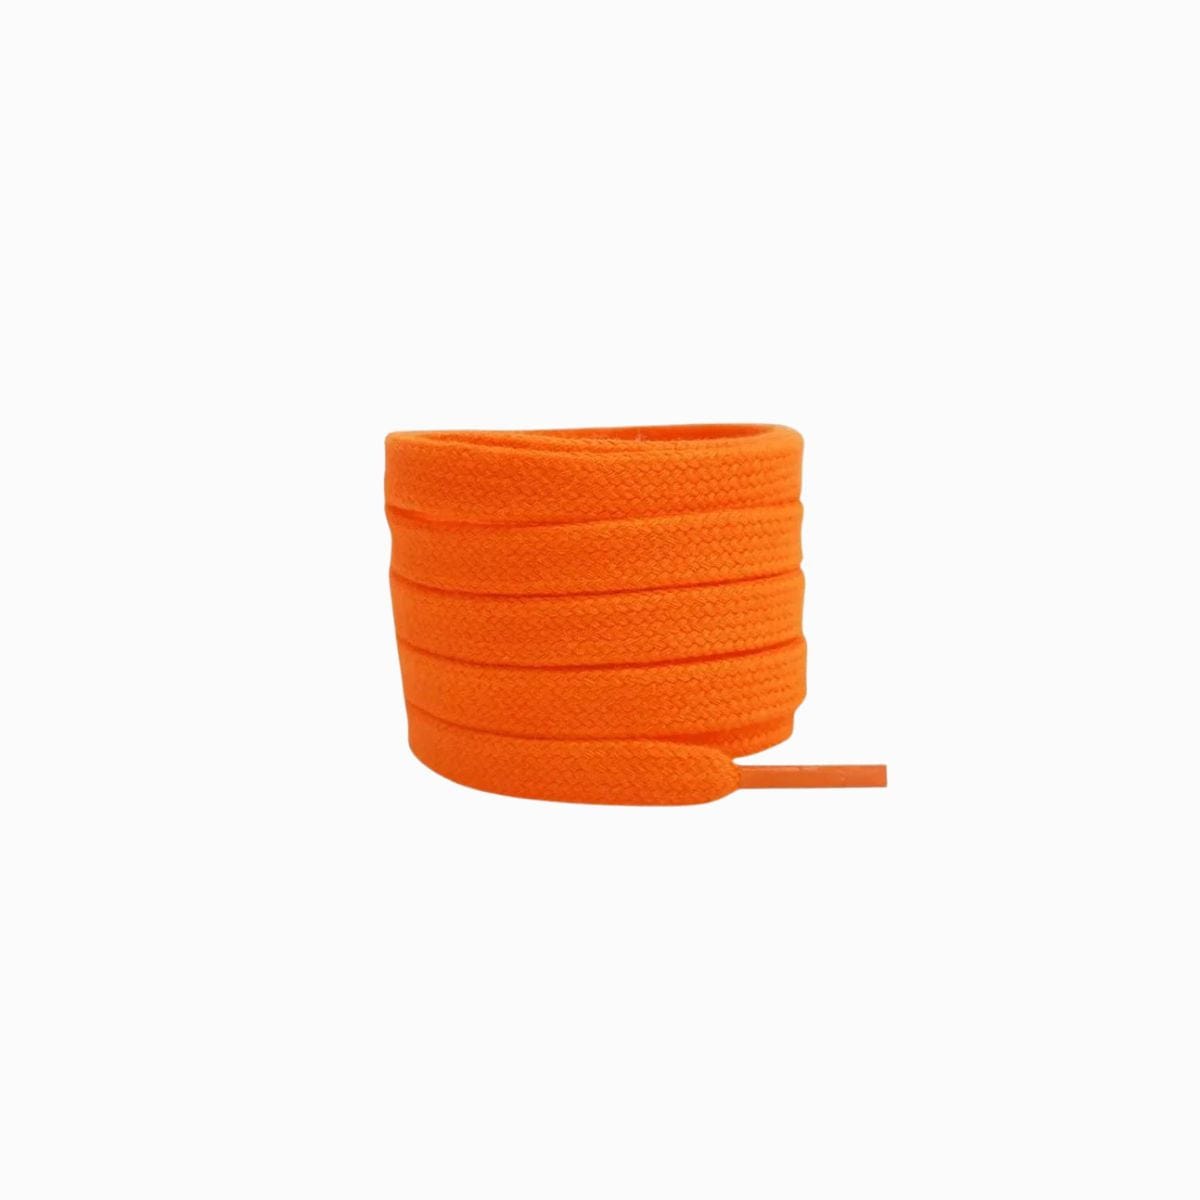 Orange Replacement Adidas Shoe Laces for Adidas Samba ADV Sneakers by Kicks Shoelaces